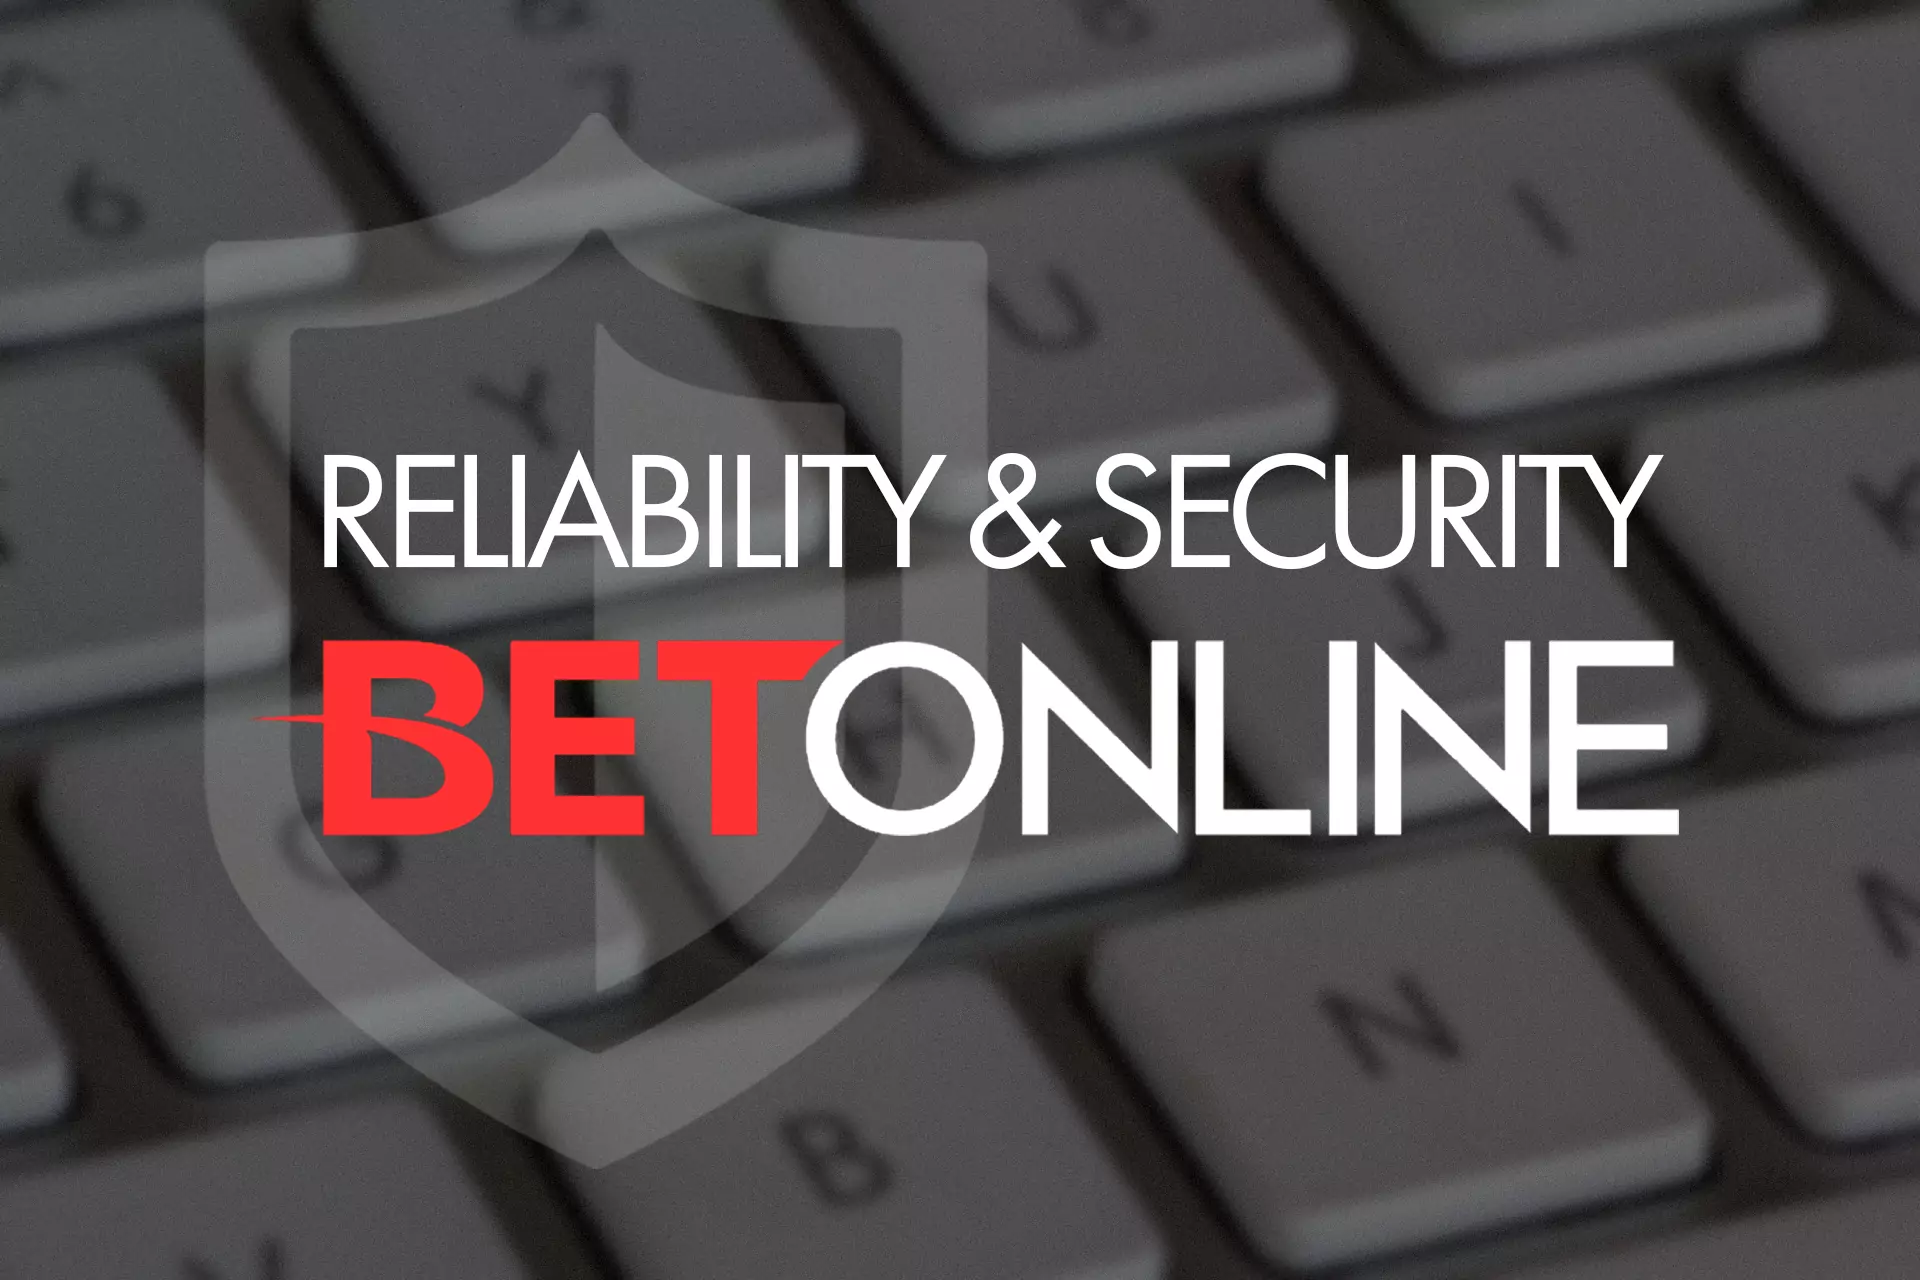 BetOnline is a reliable and trustworthy bookmaker's office.